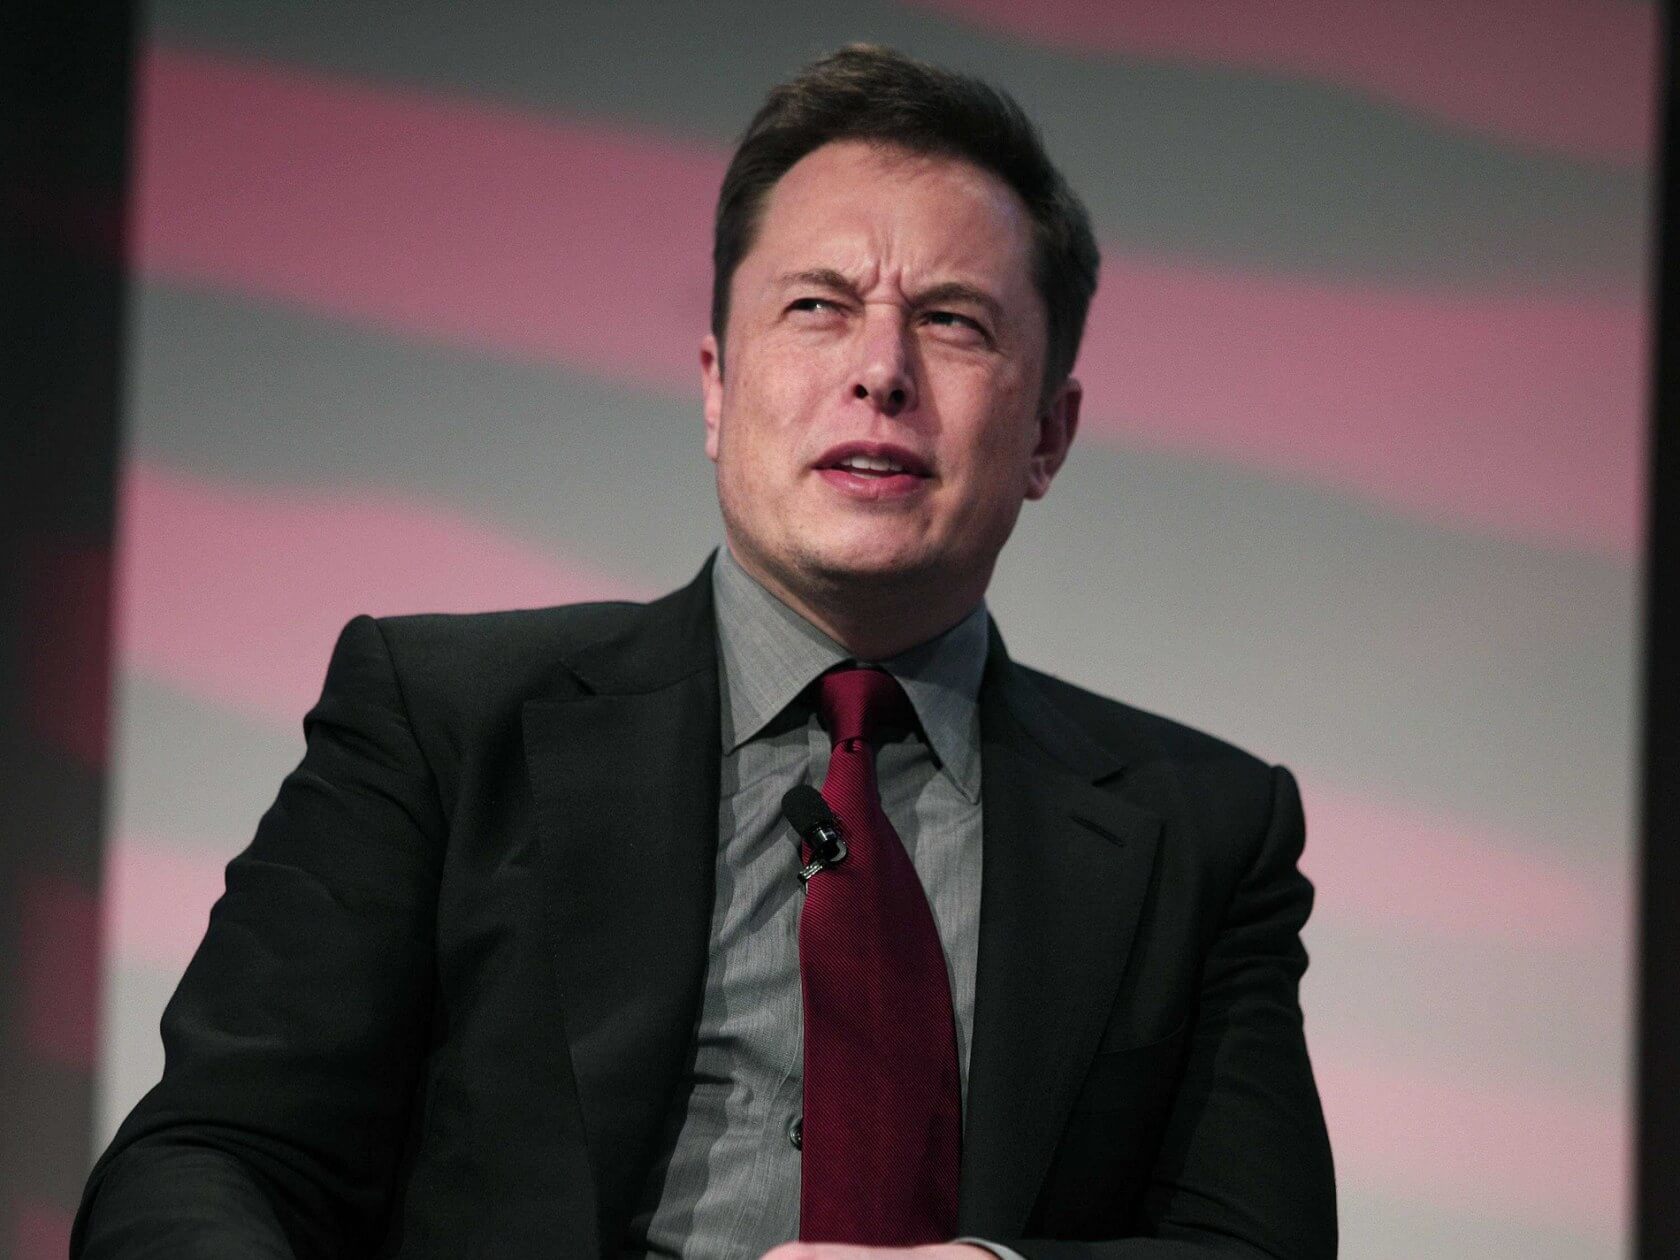 Elon Musk abandoned Twitter deal because of World War 3 fears, claim company lawyers